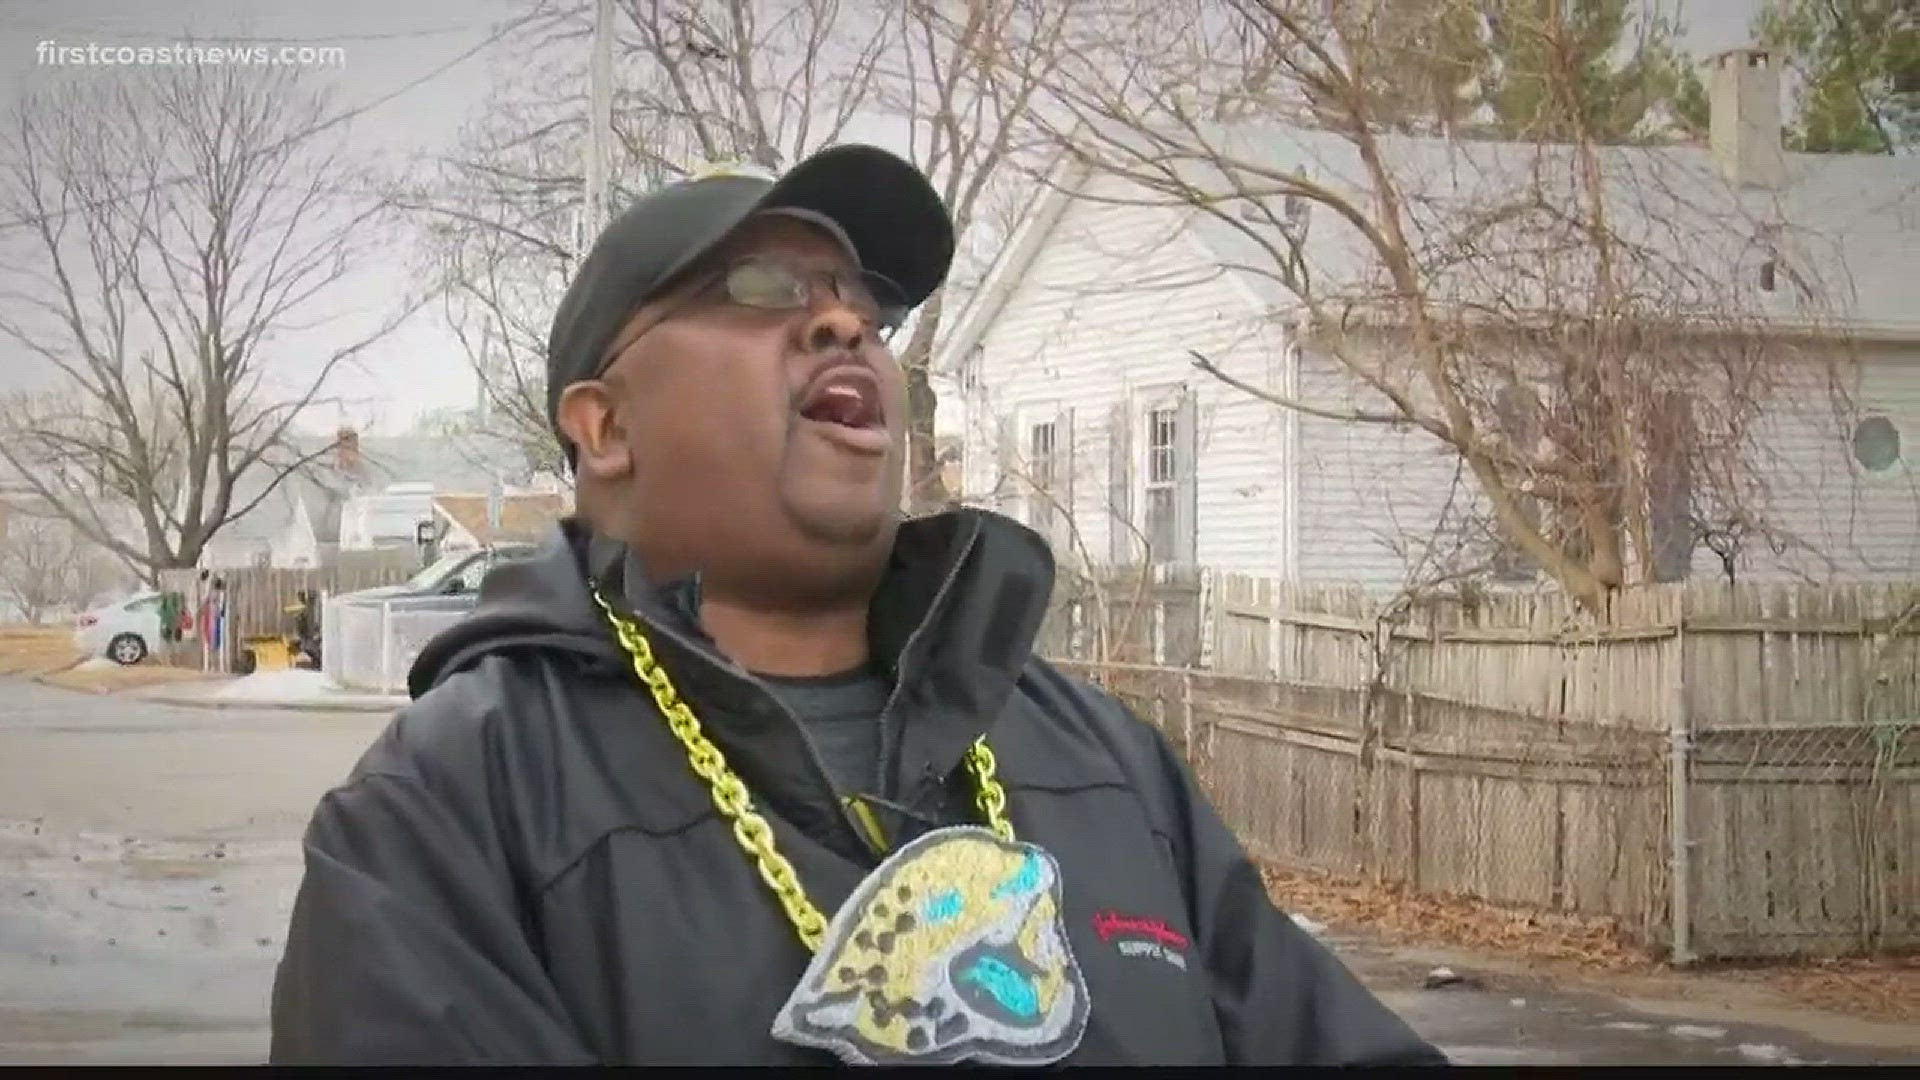 Eric Mitchell, whose story is going viral across the nation, has landed in New England after scoring free tickets from the Jaguars following news that he only has months to live.